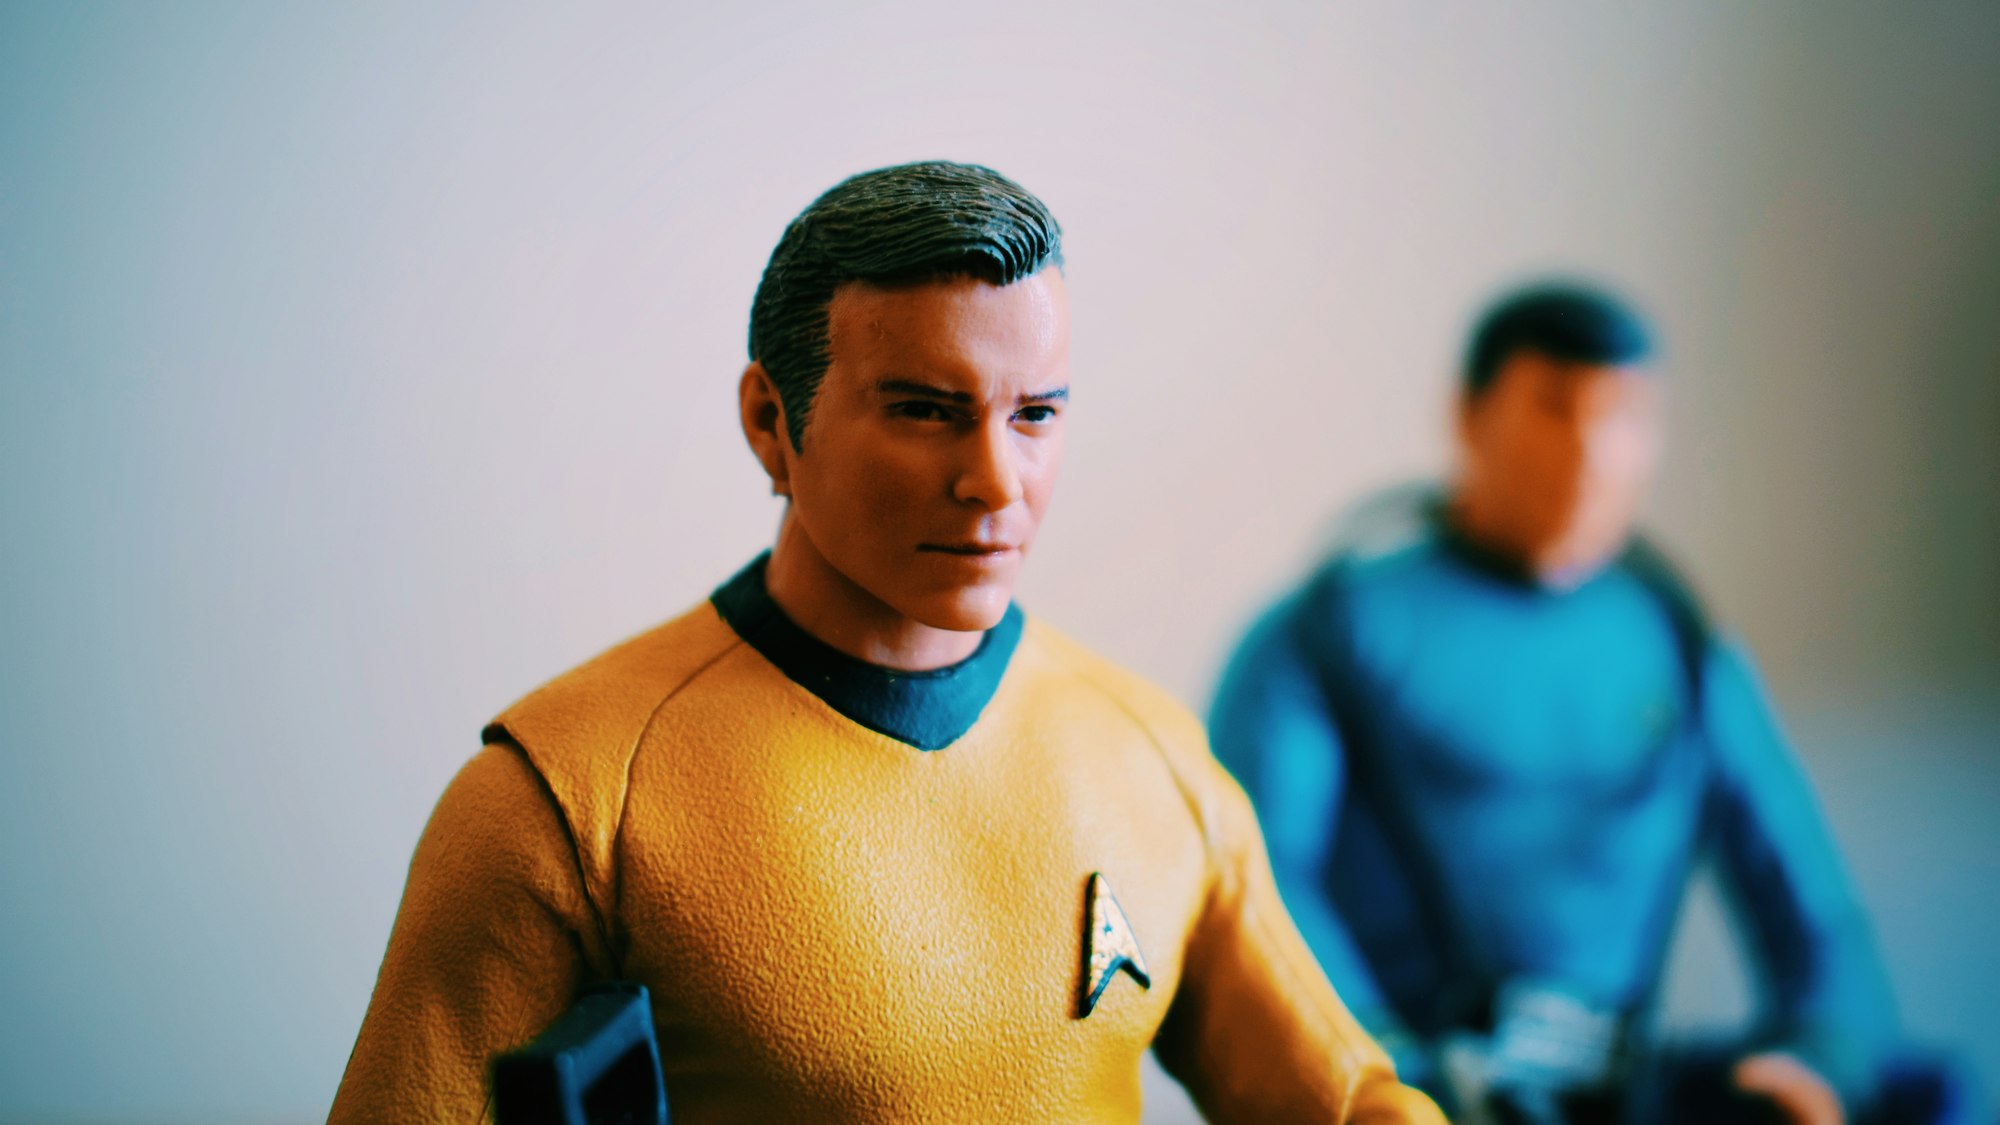 “The prejudices people feel about each other disappear when they get to know each other.” ~ Captain James T. Kirk